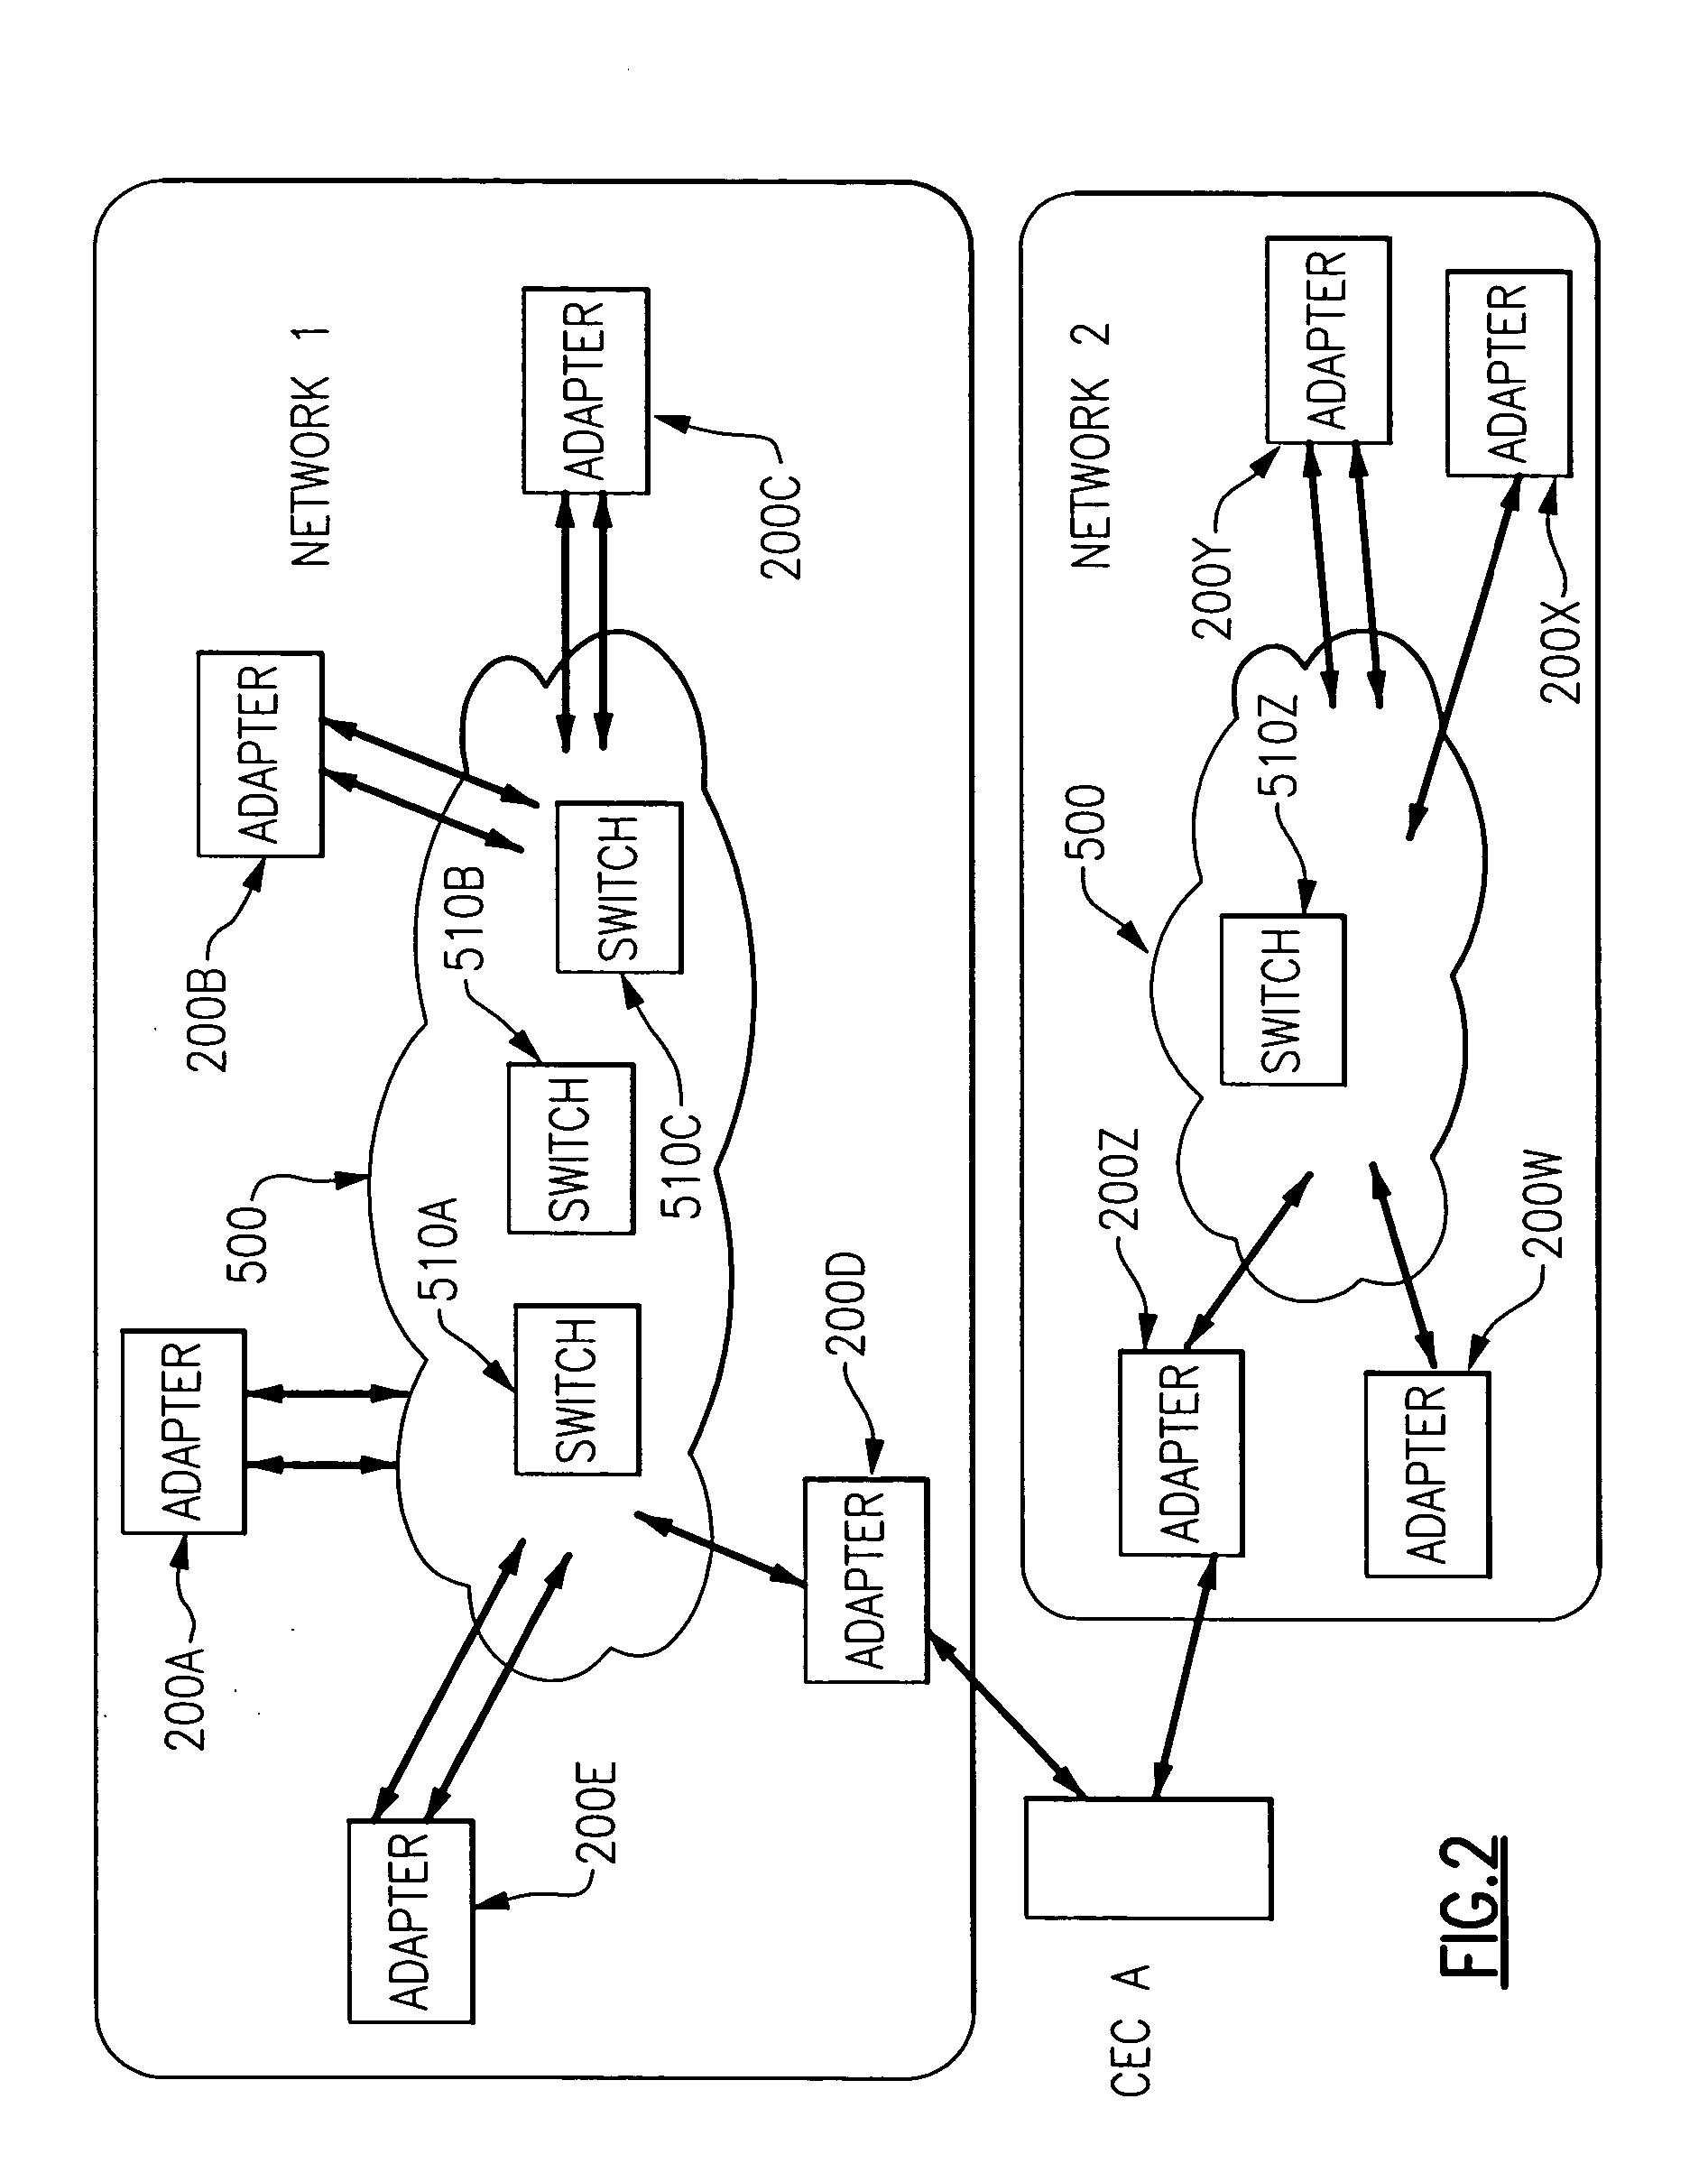 Error recovery for data processing systems transferring message packets through communications adapters